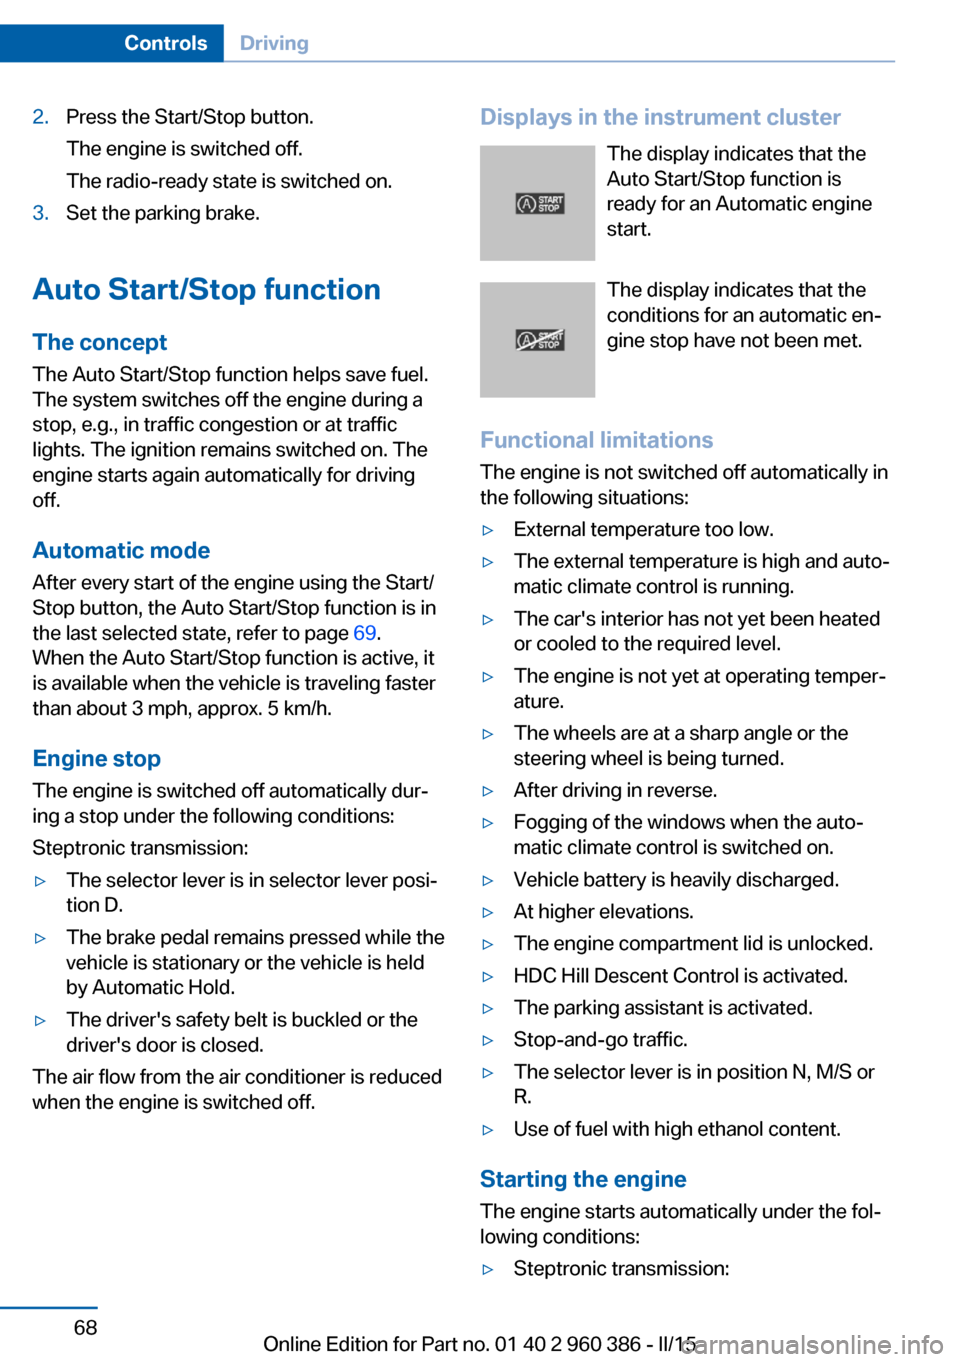 BMW X3 2015 F25 Owners Manual 2.Press the Start/Stop button.
The engine is switched off.
The radio-ready state is switched on.3.Set the parking brake.
Auto Start/Stop function
The concept The Auto Start/Stop function helps save fu